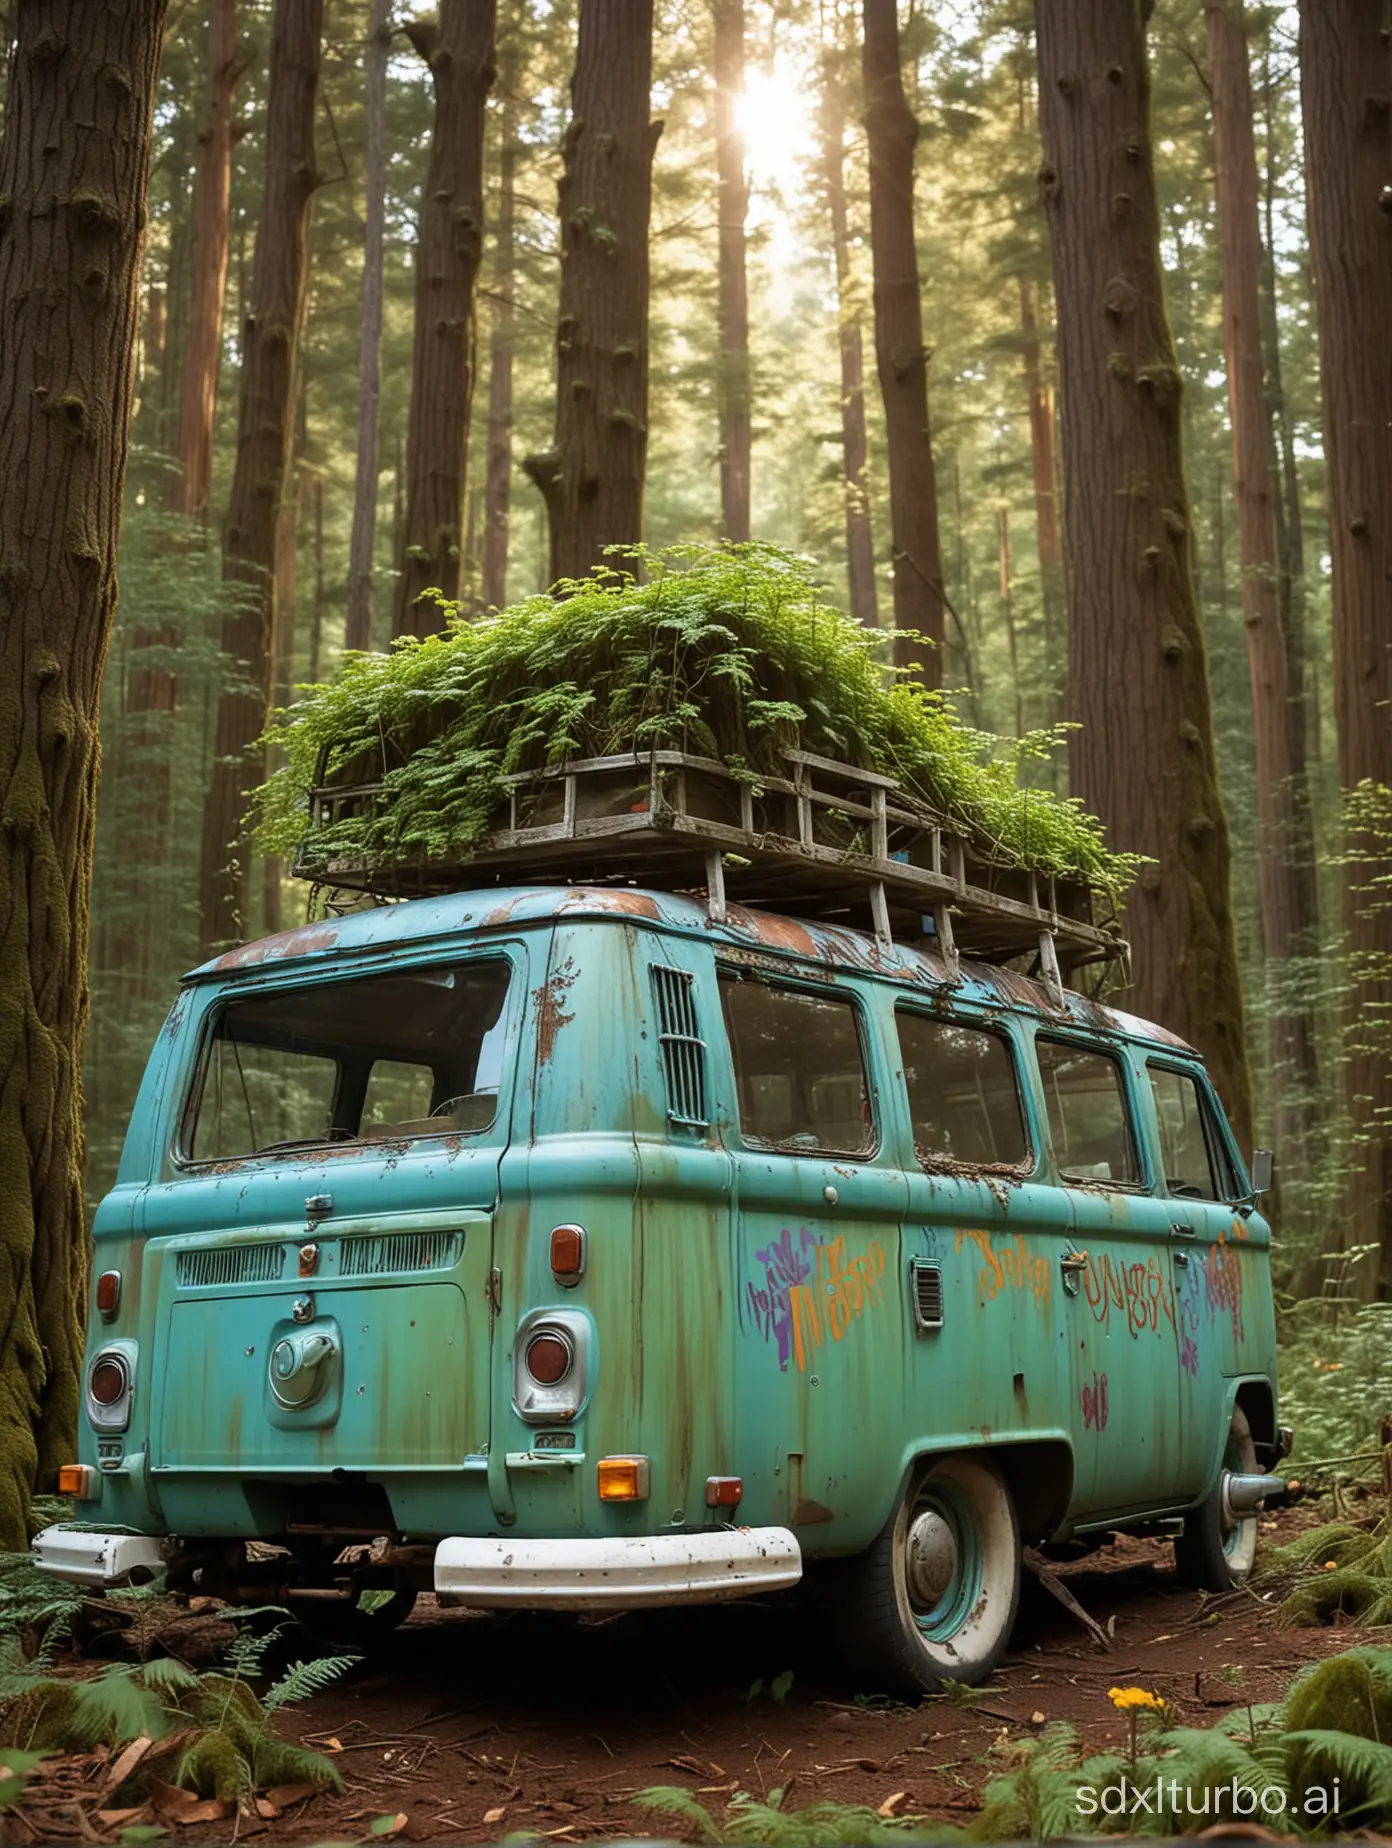 Abandoned-Mystery-Machine-Van-Overgrown-in-Forest